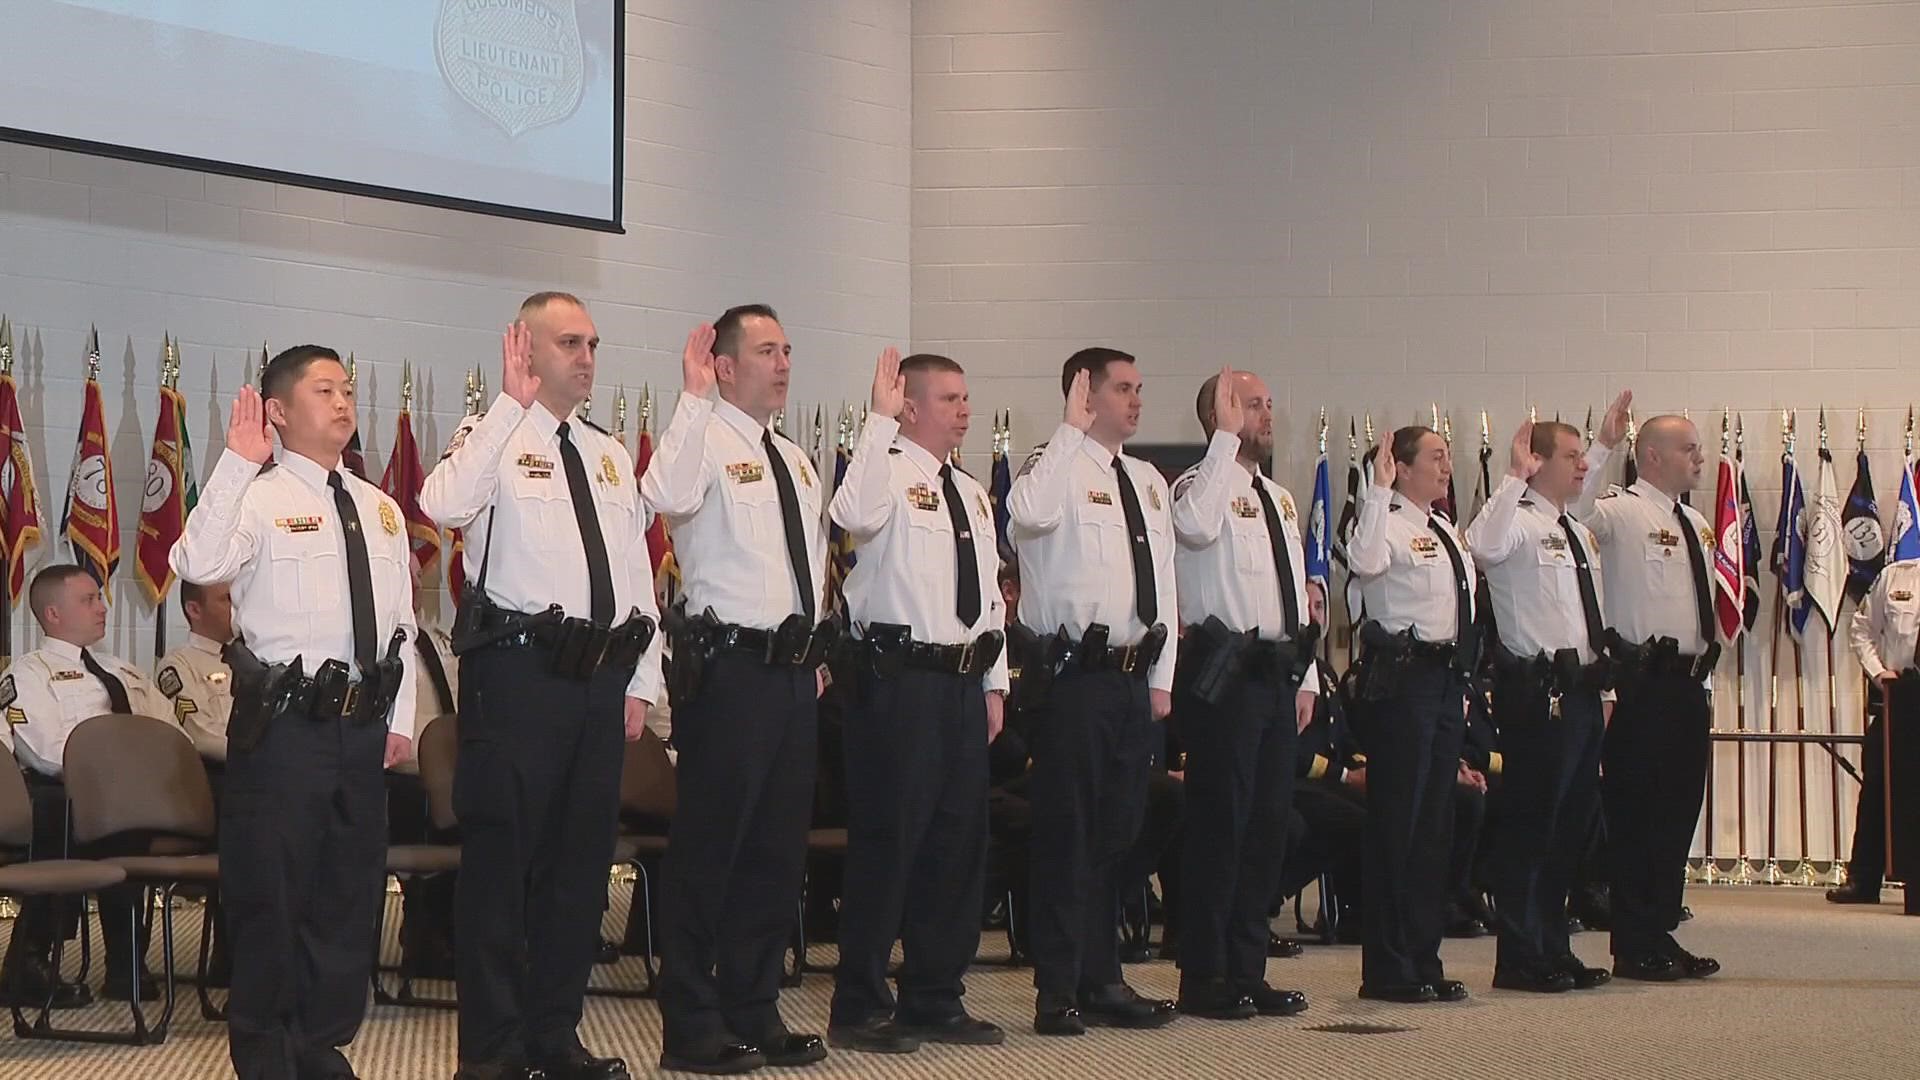 “The folks who got promoted today are going to be influencing the division for a generation. It's really exciting to see,” said newly sworn-in Deputy Chief Tim Myers